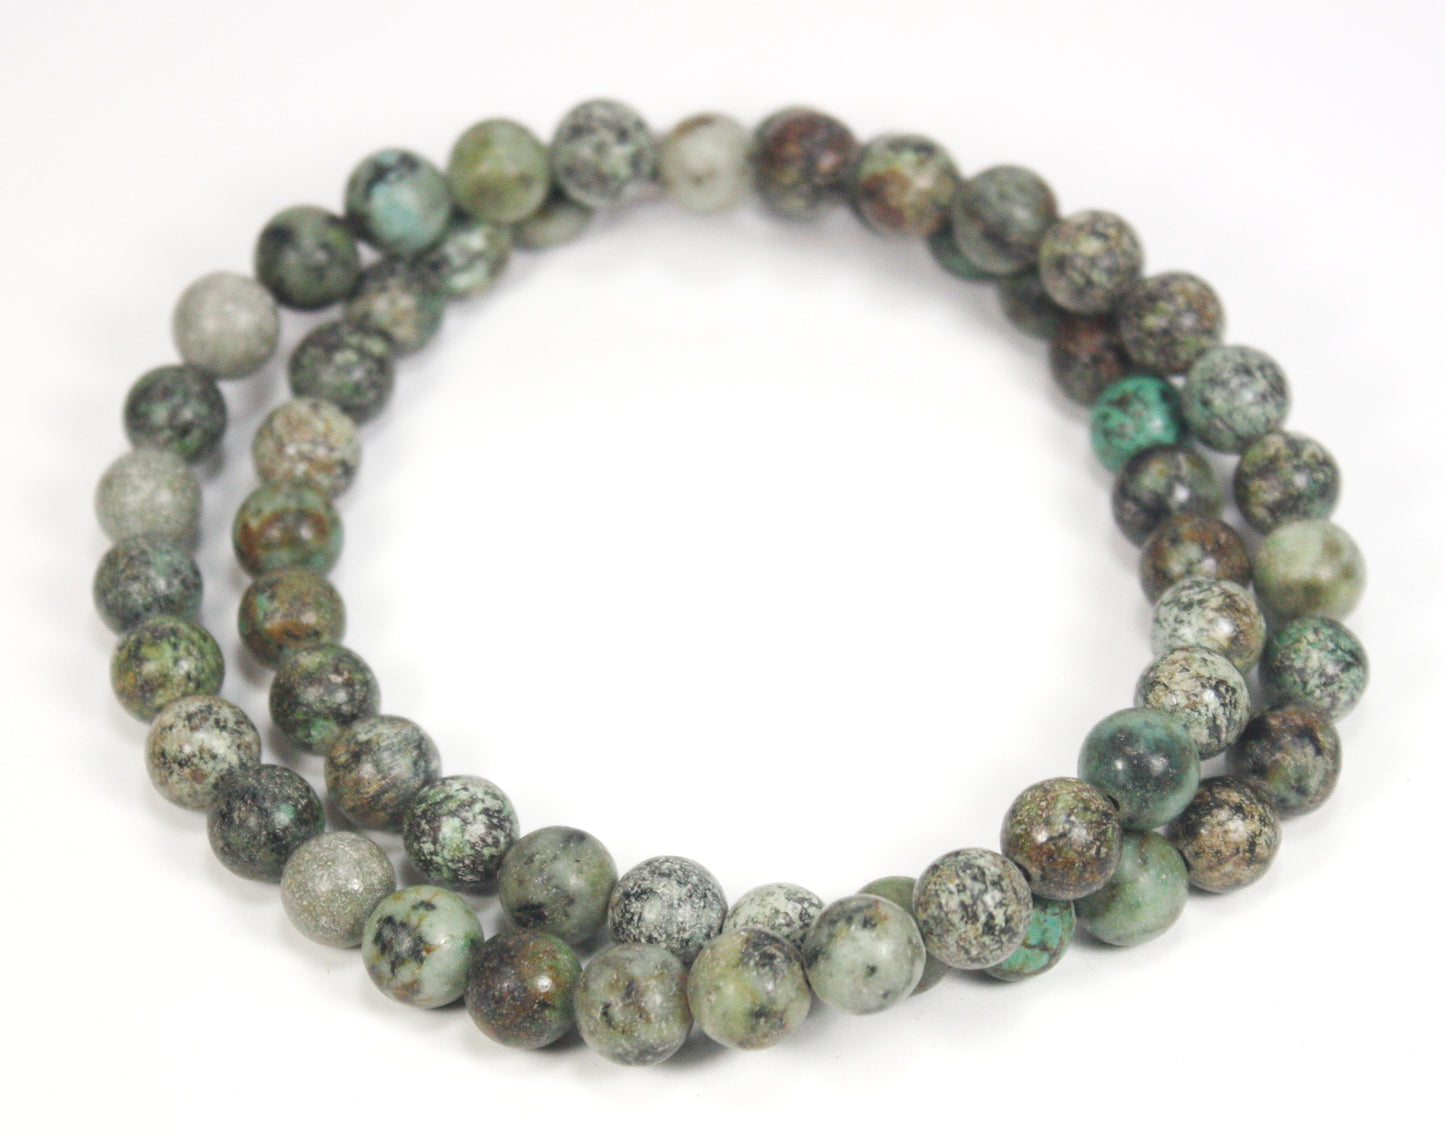 African Turquoise Necklace (8mm Medium Beads)